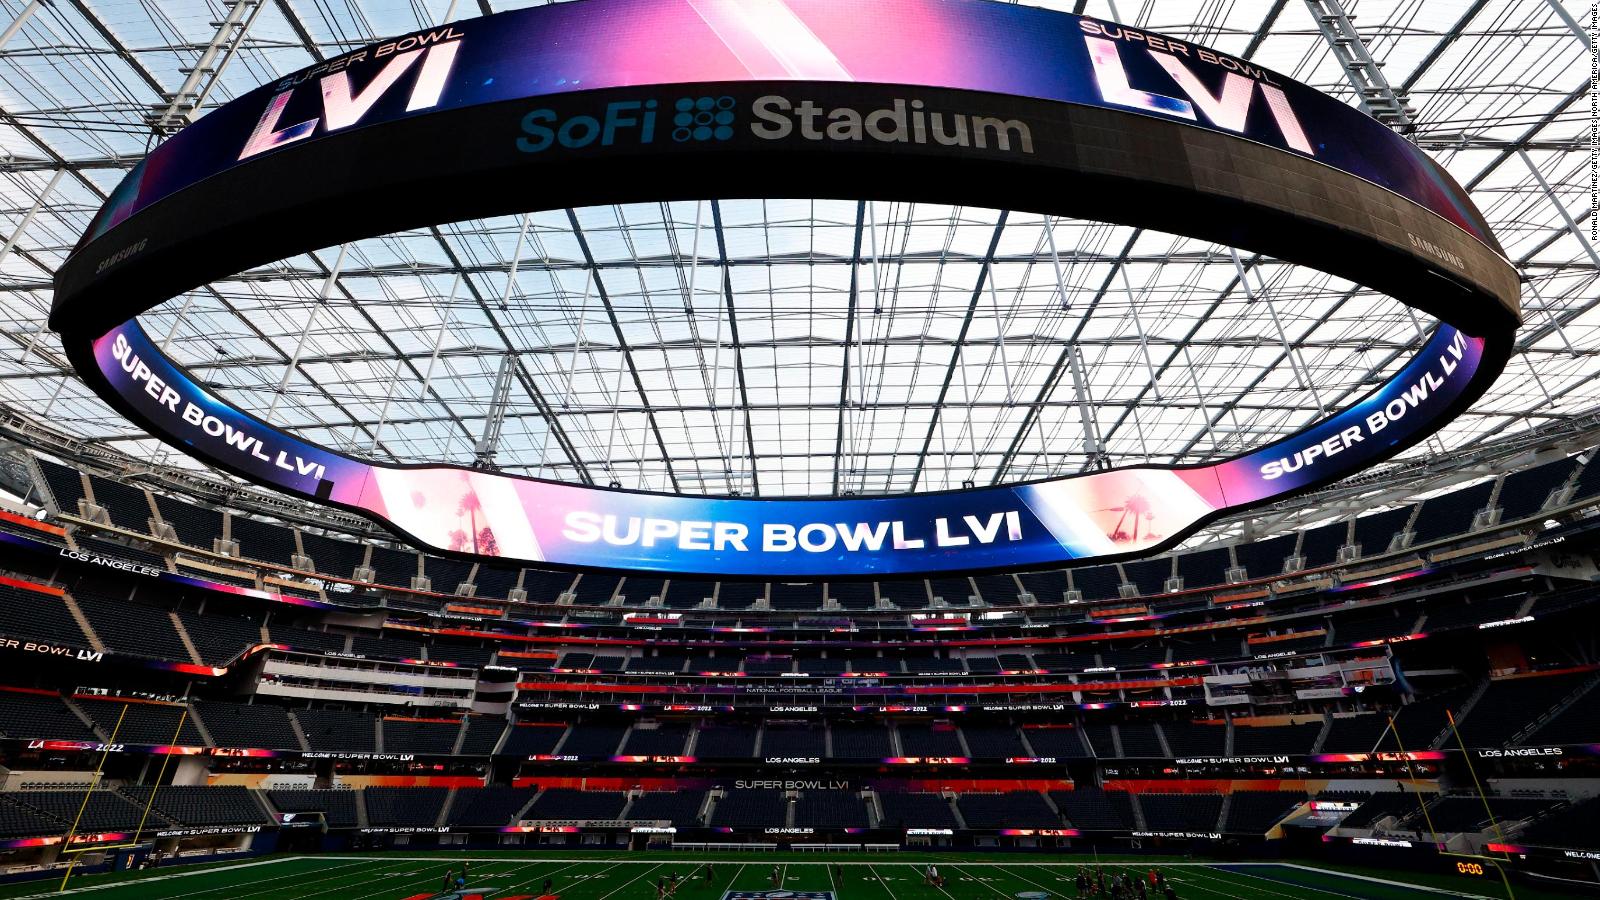 How to watch the Super Bowl live Start time, channels and other things